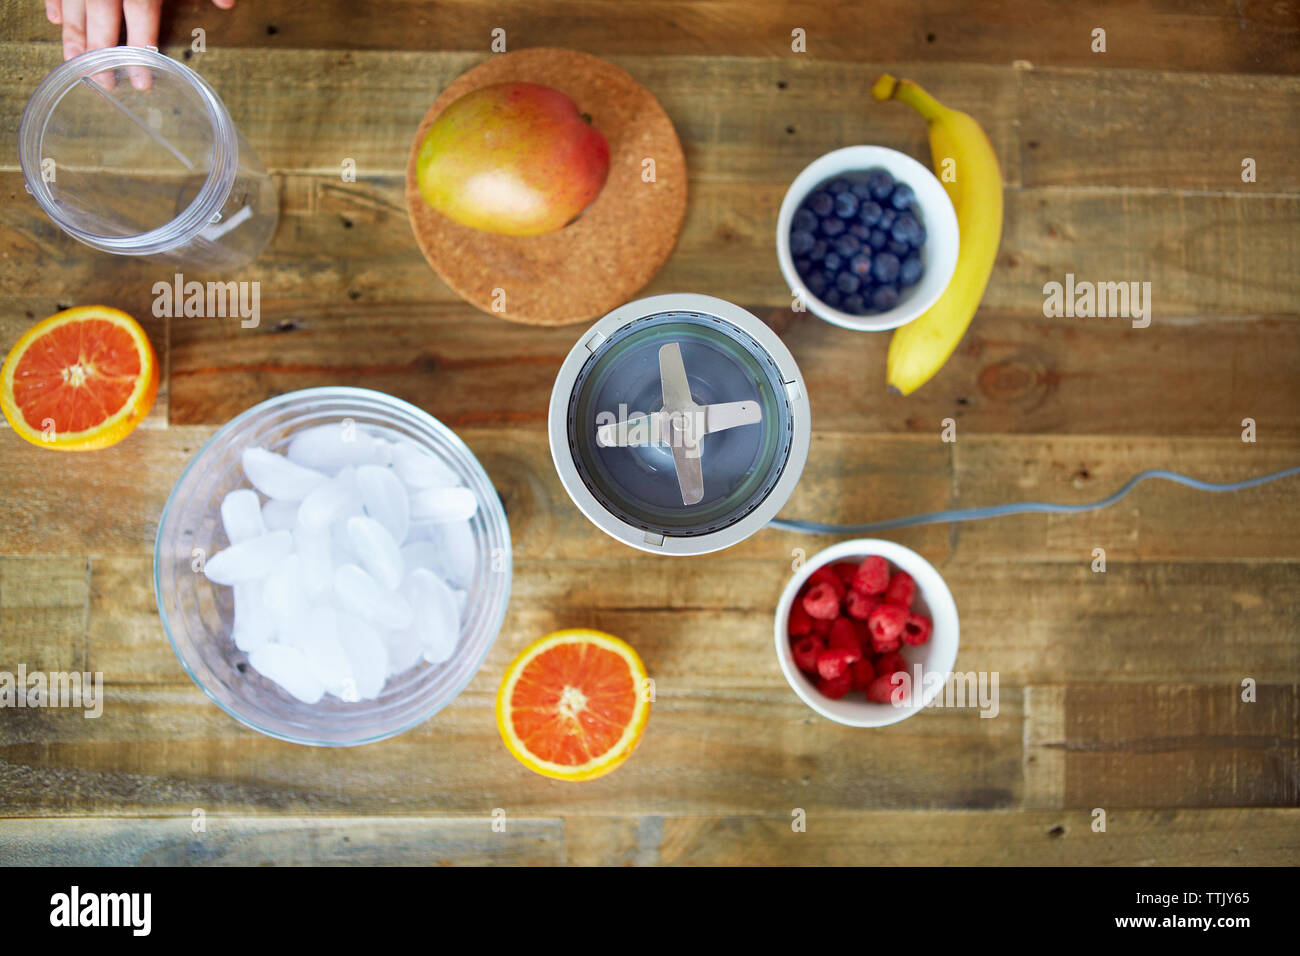 Overhead view of blender with fruits and containers on table Stock Photo